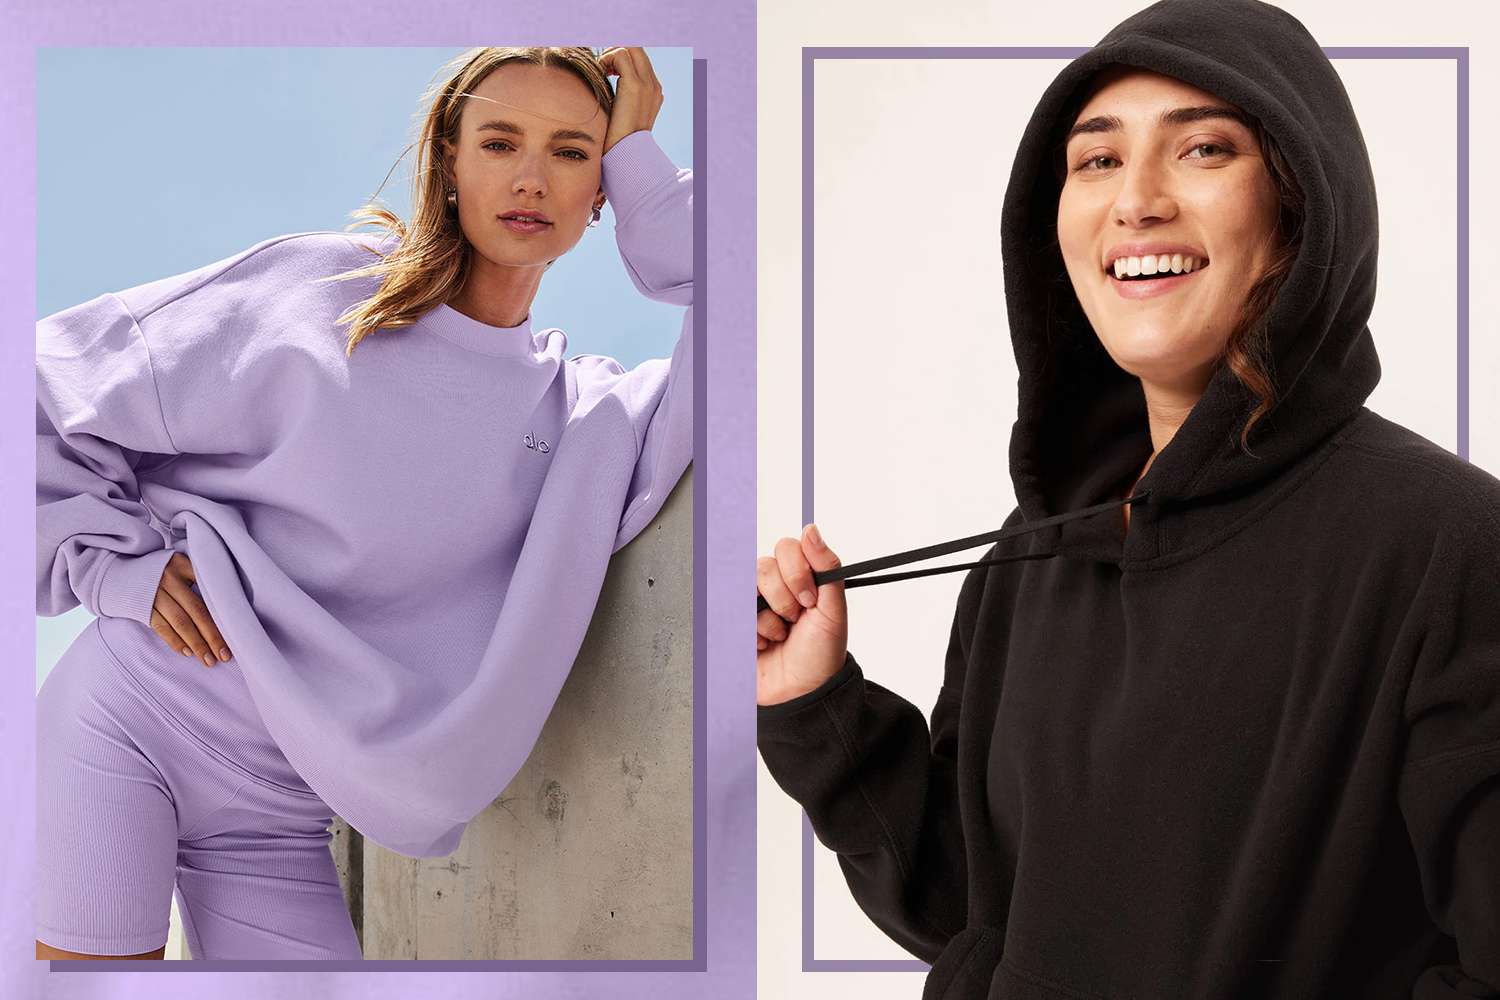 From Athleisure to Streetwear: The Hoodie's Ascent to Design Popularity